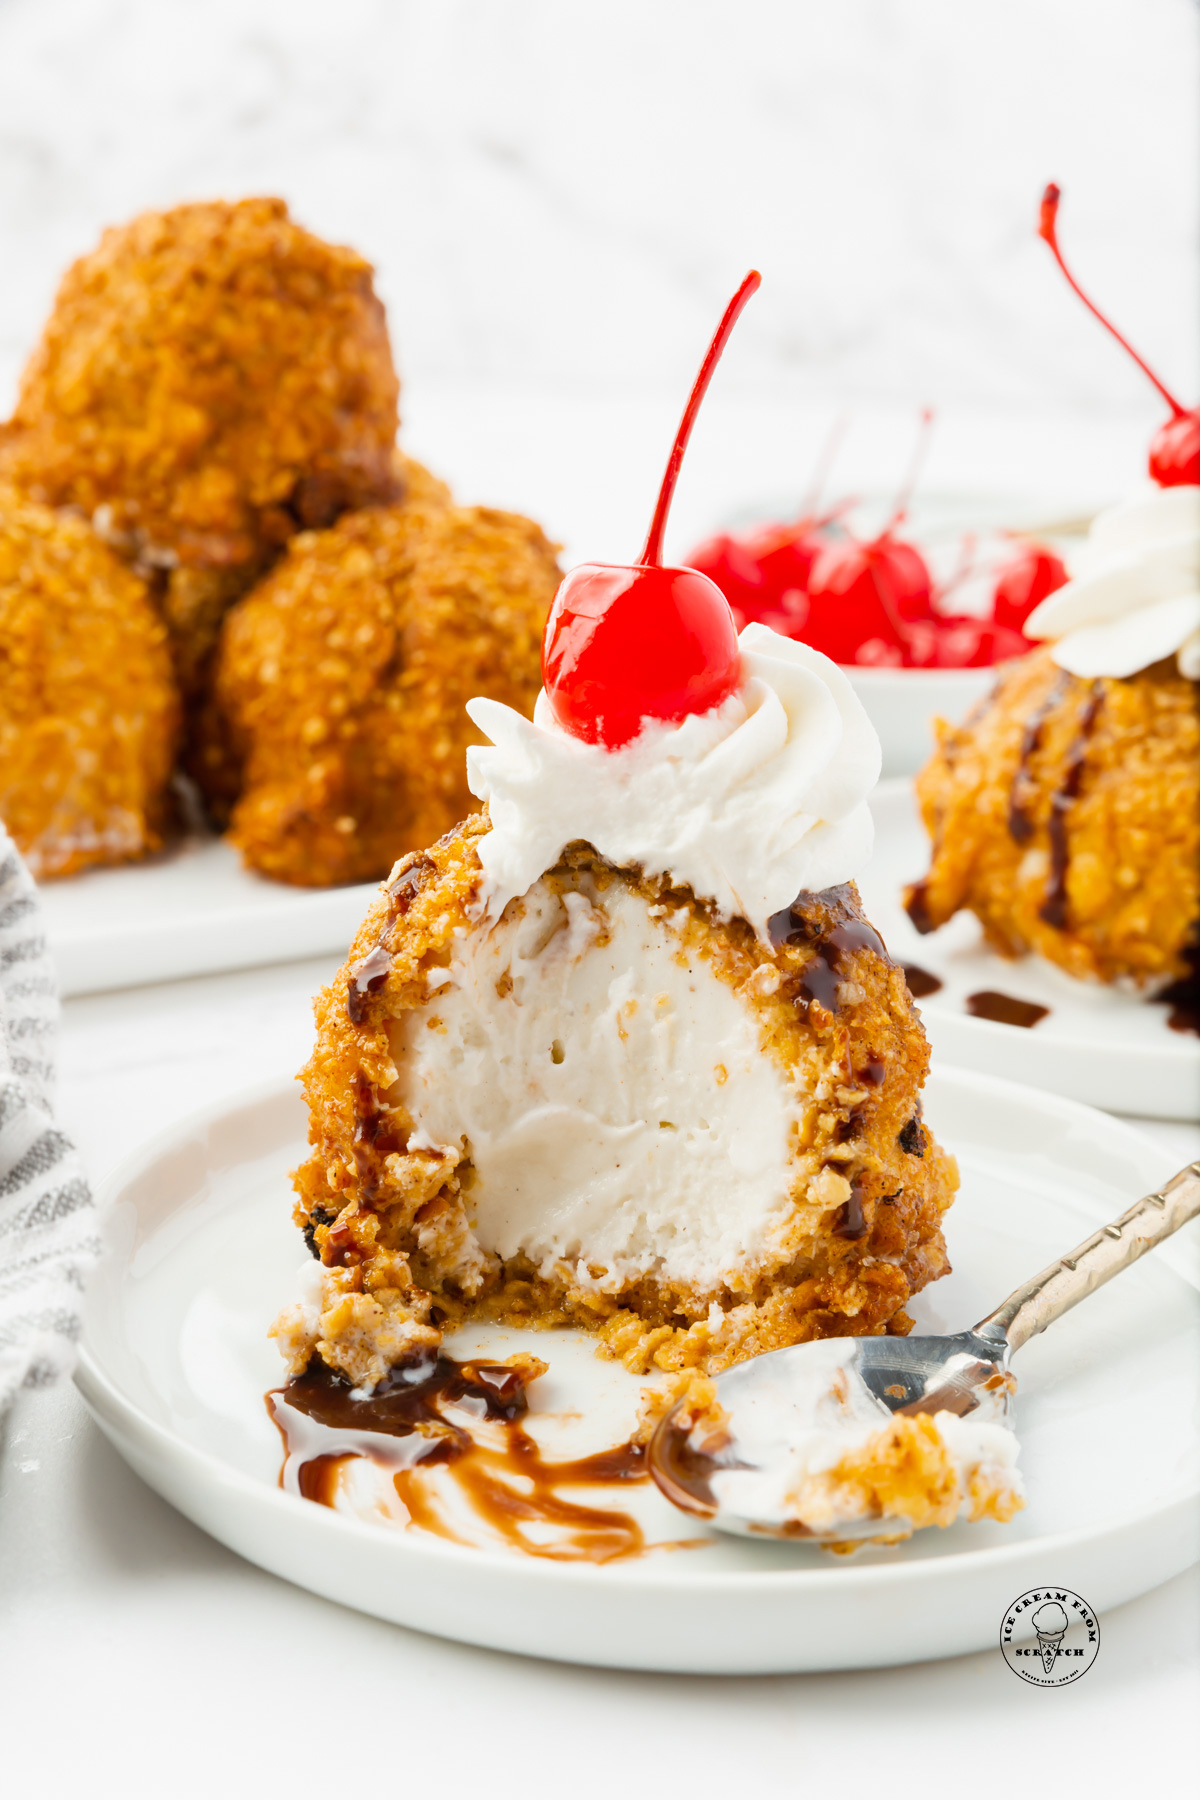 mexican fried ice cream on a plate, topped with whipped cream and a cherry. A spoon has taken a large bite from the dessert.